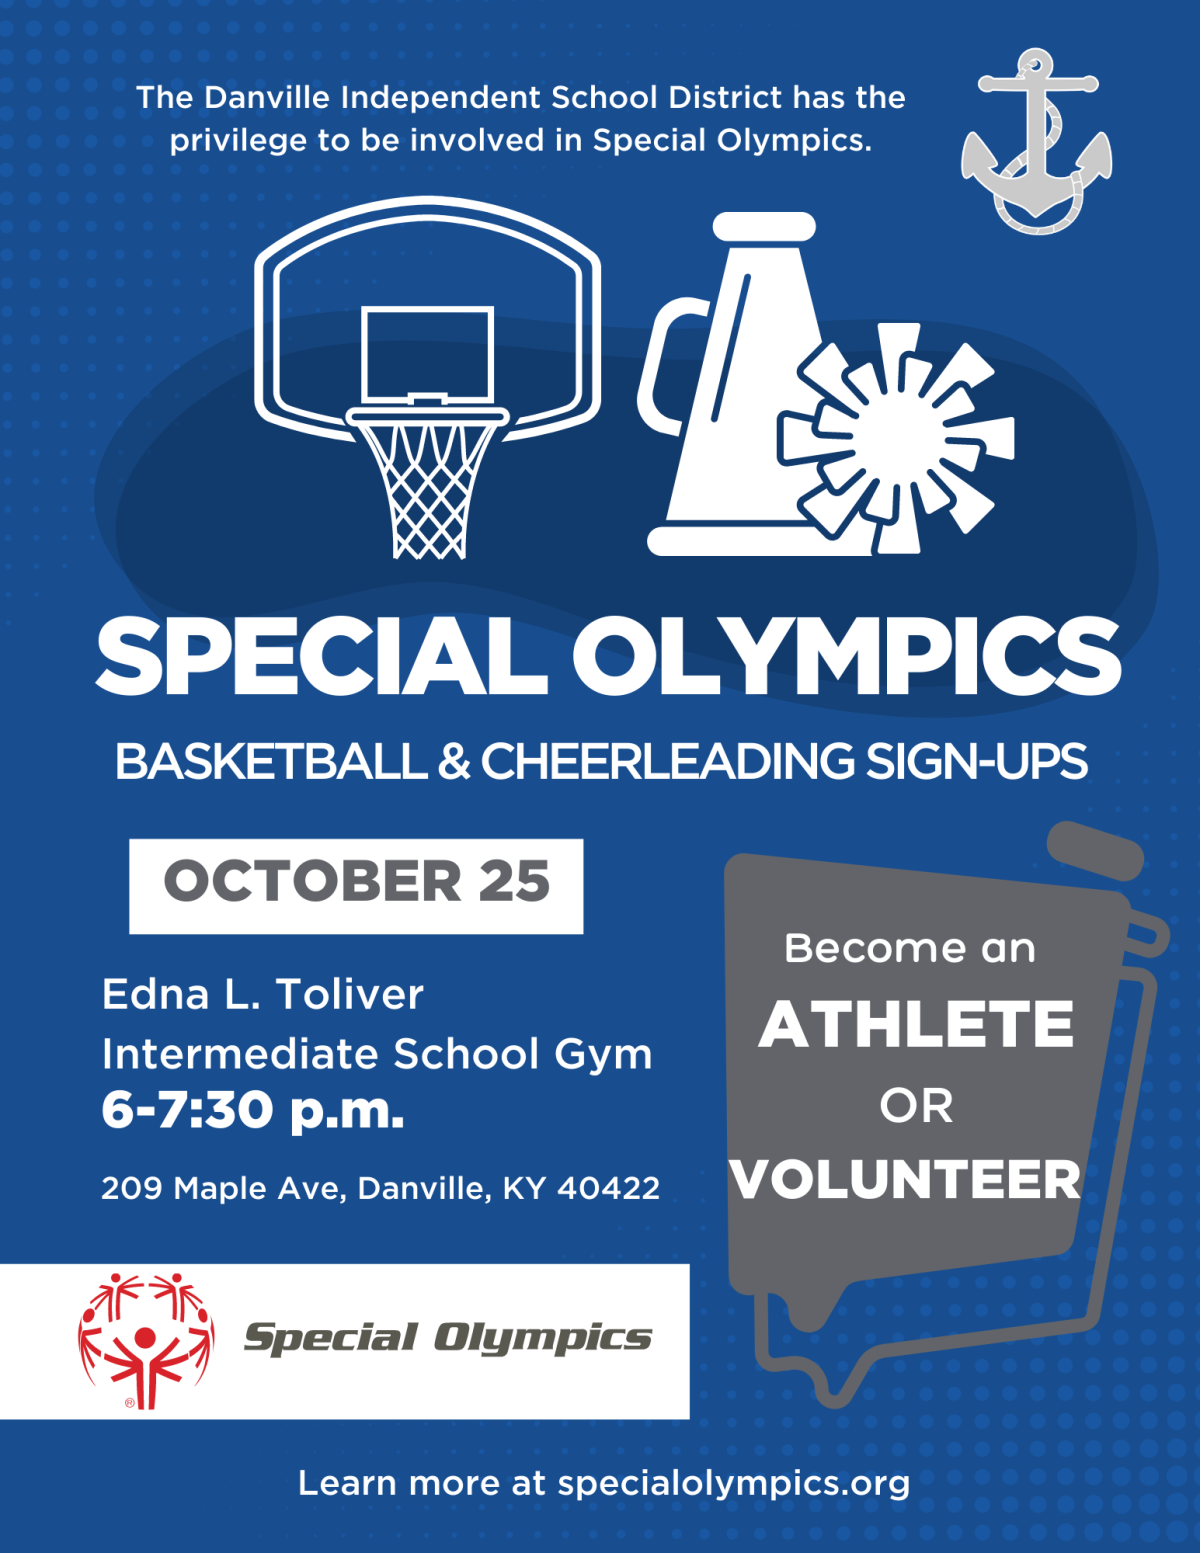 DISD hosting Special Olympics basketball and cheerleading signups